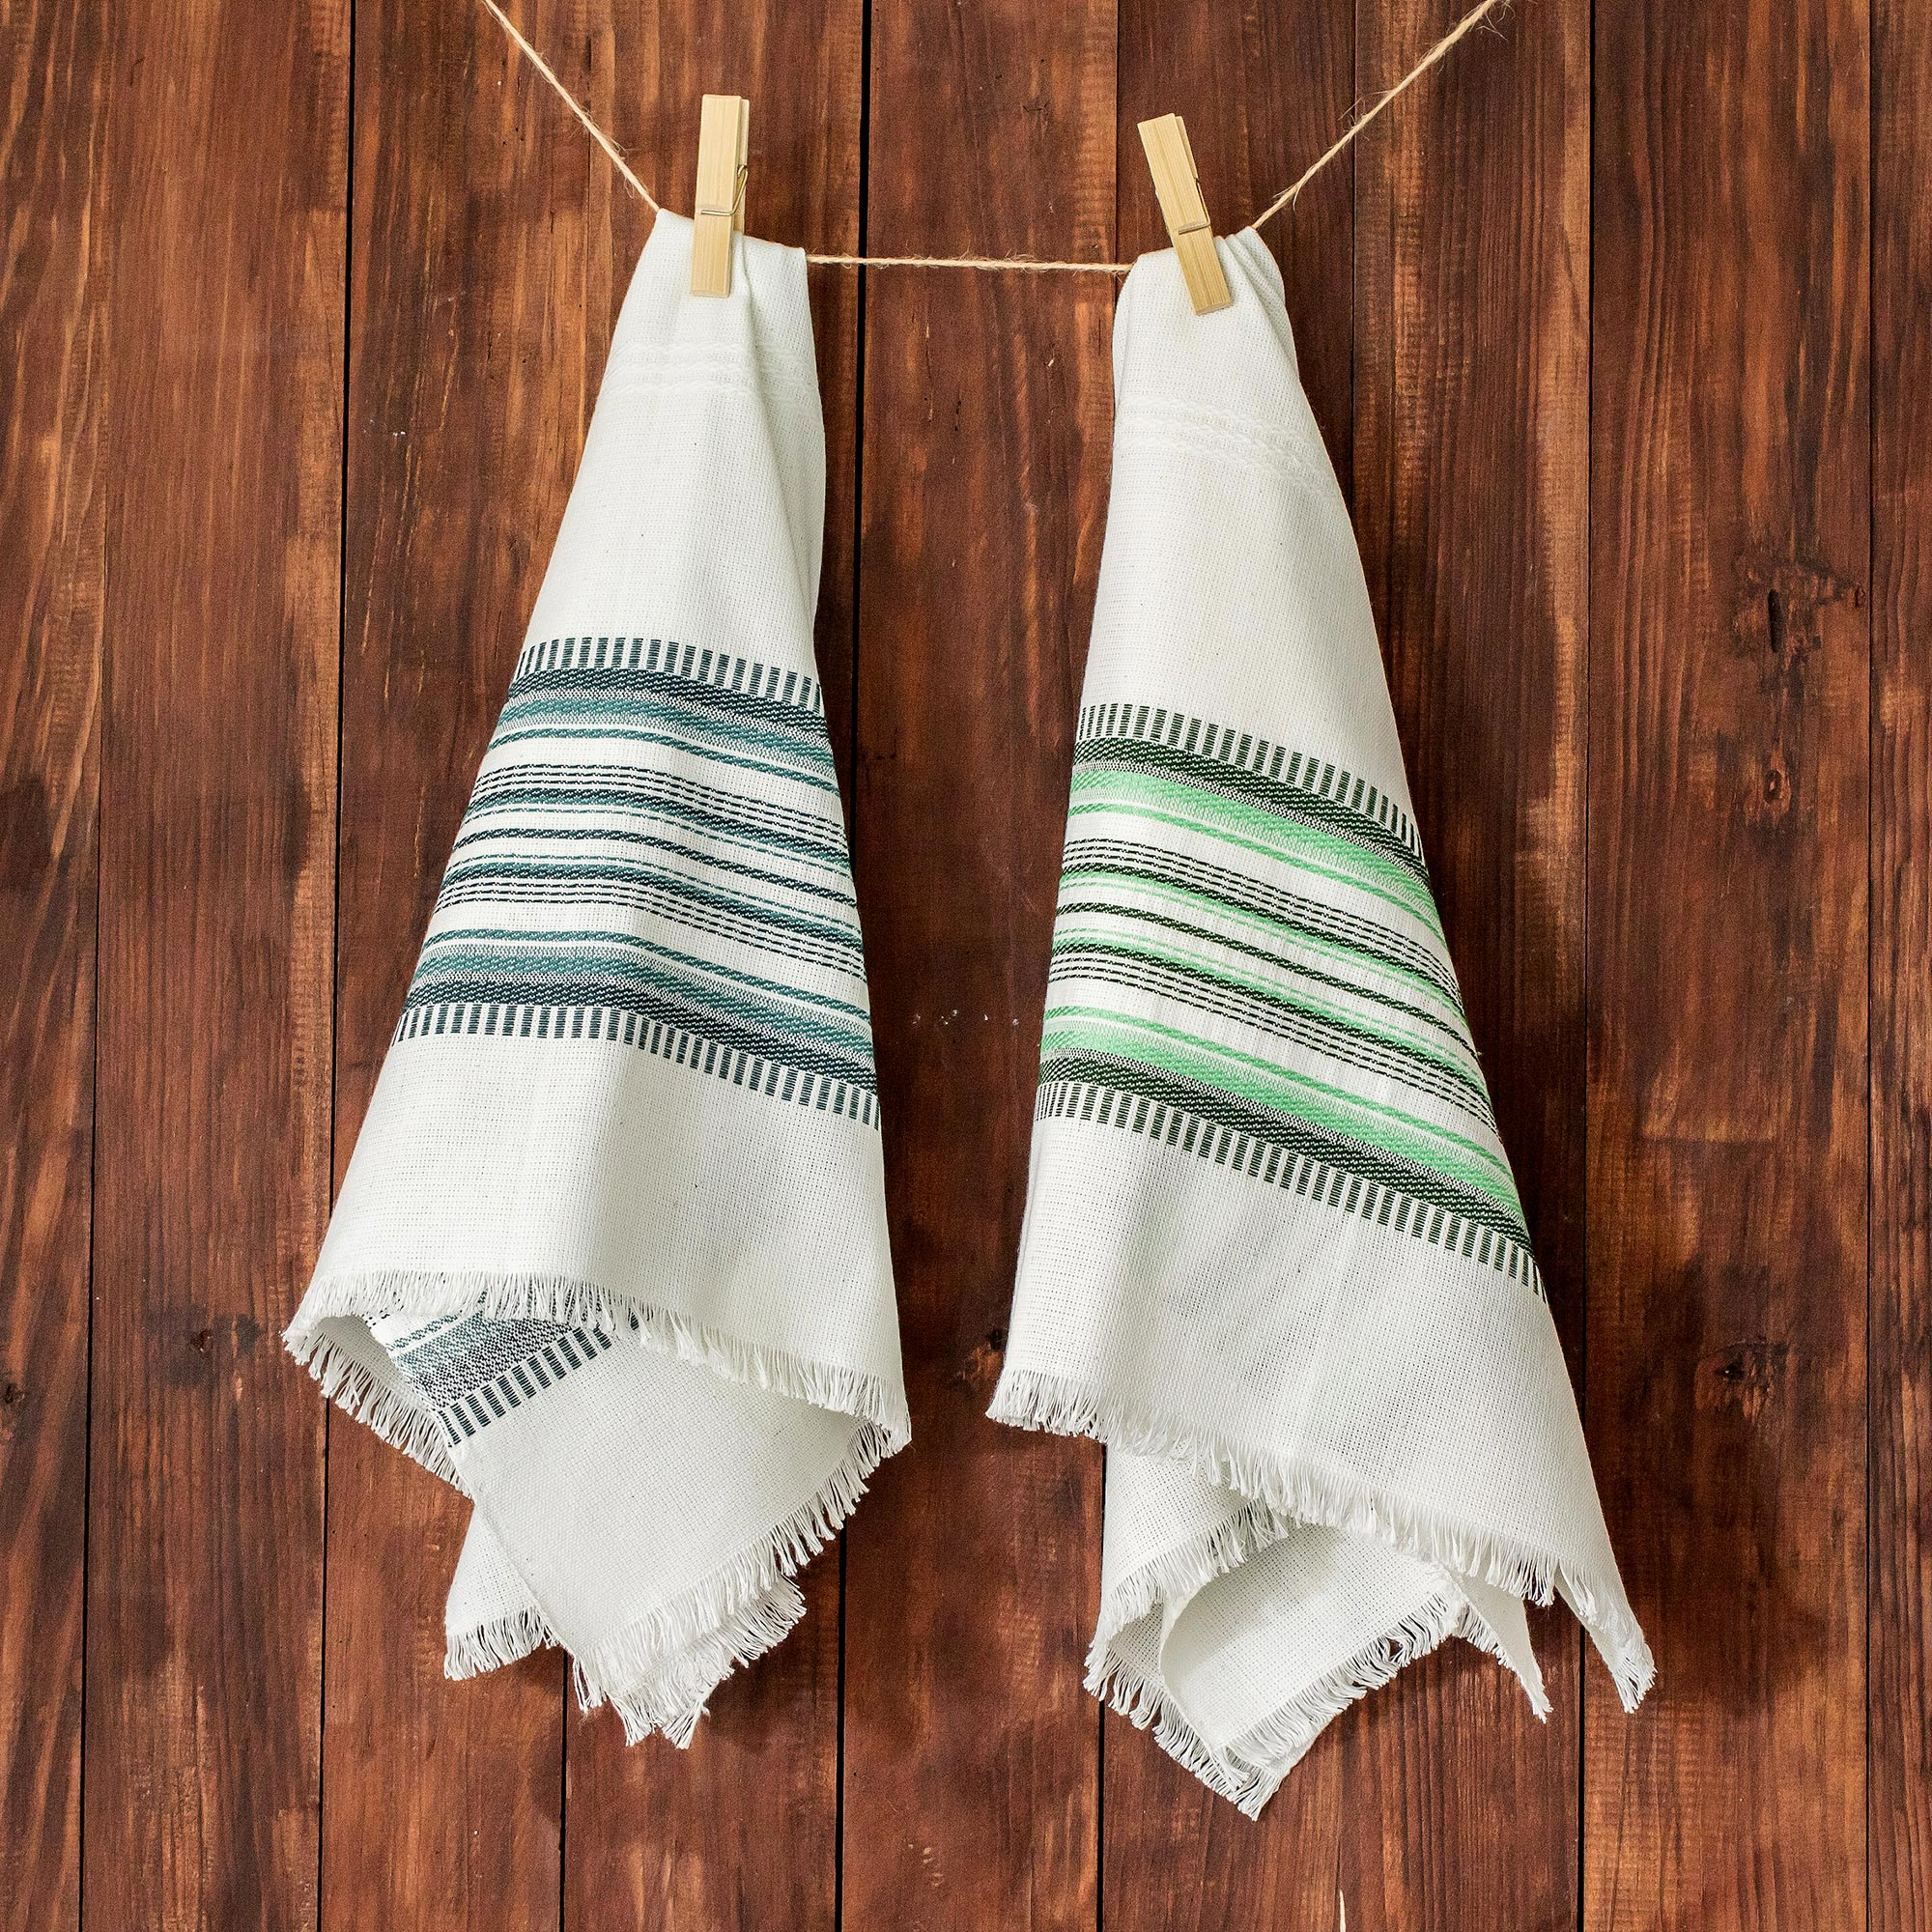 Two Handwoven Guatemalan White and Green Cotton Dish Towels